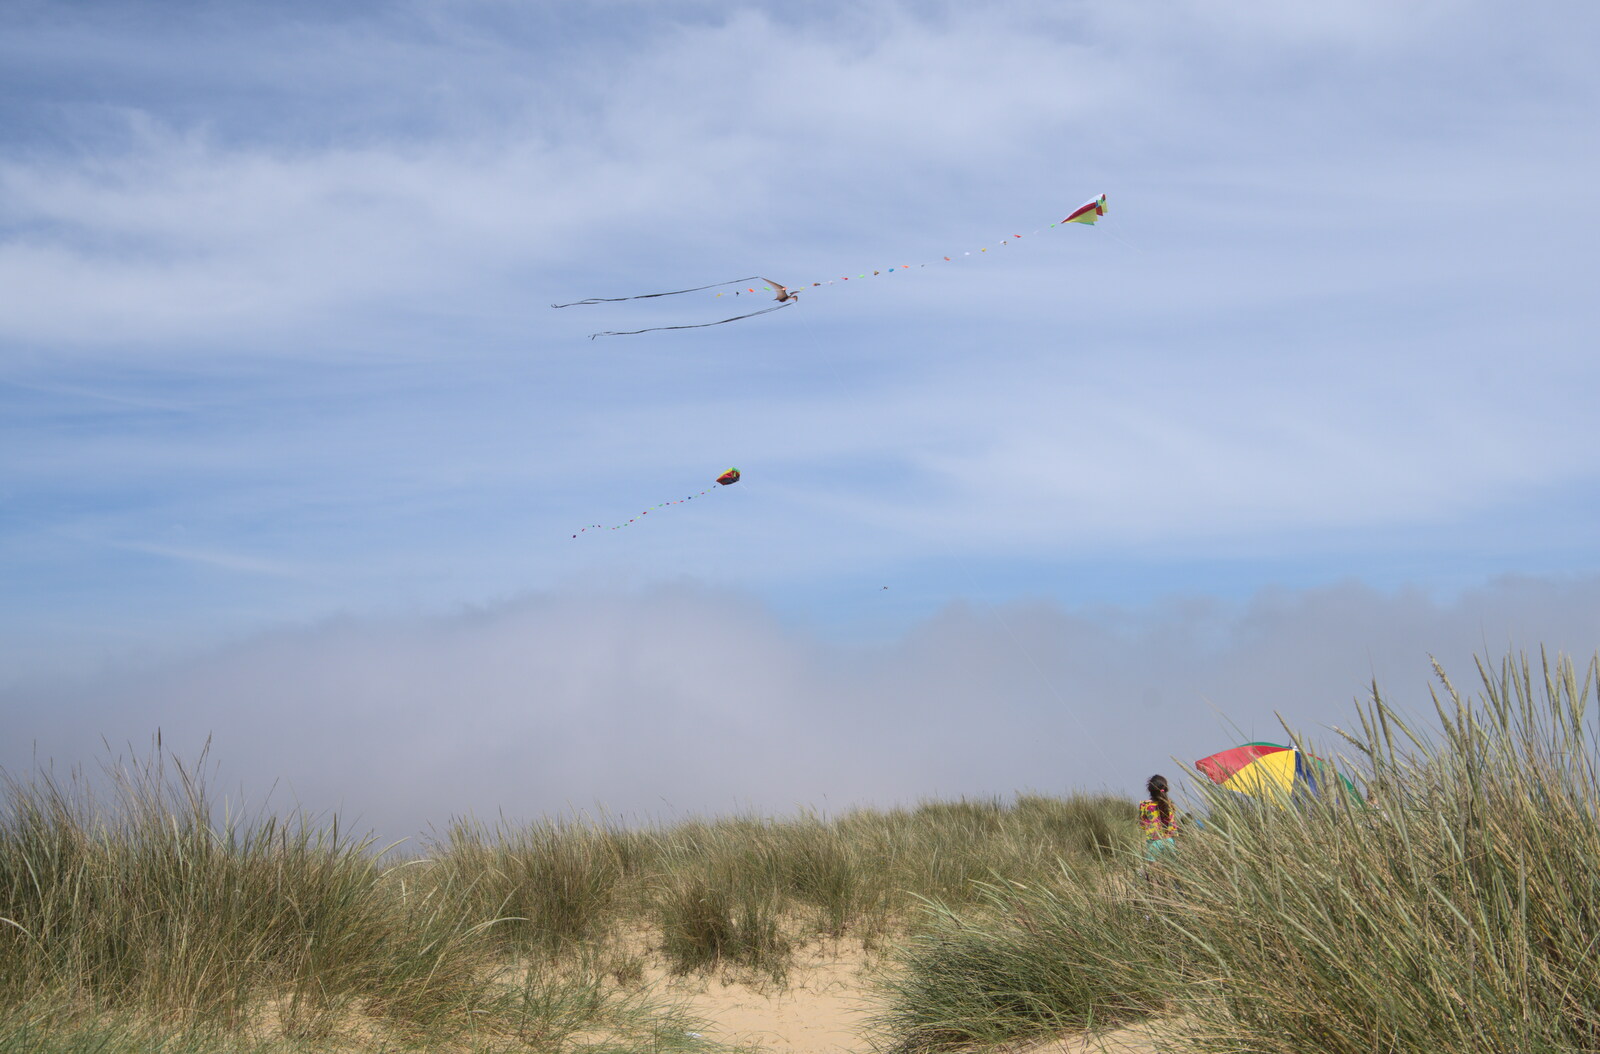 Kites in the dunes from A Return to Southwold, Suffolk - 14th June 2020